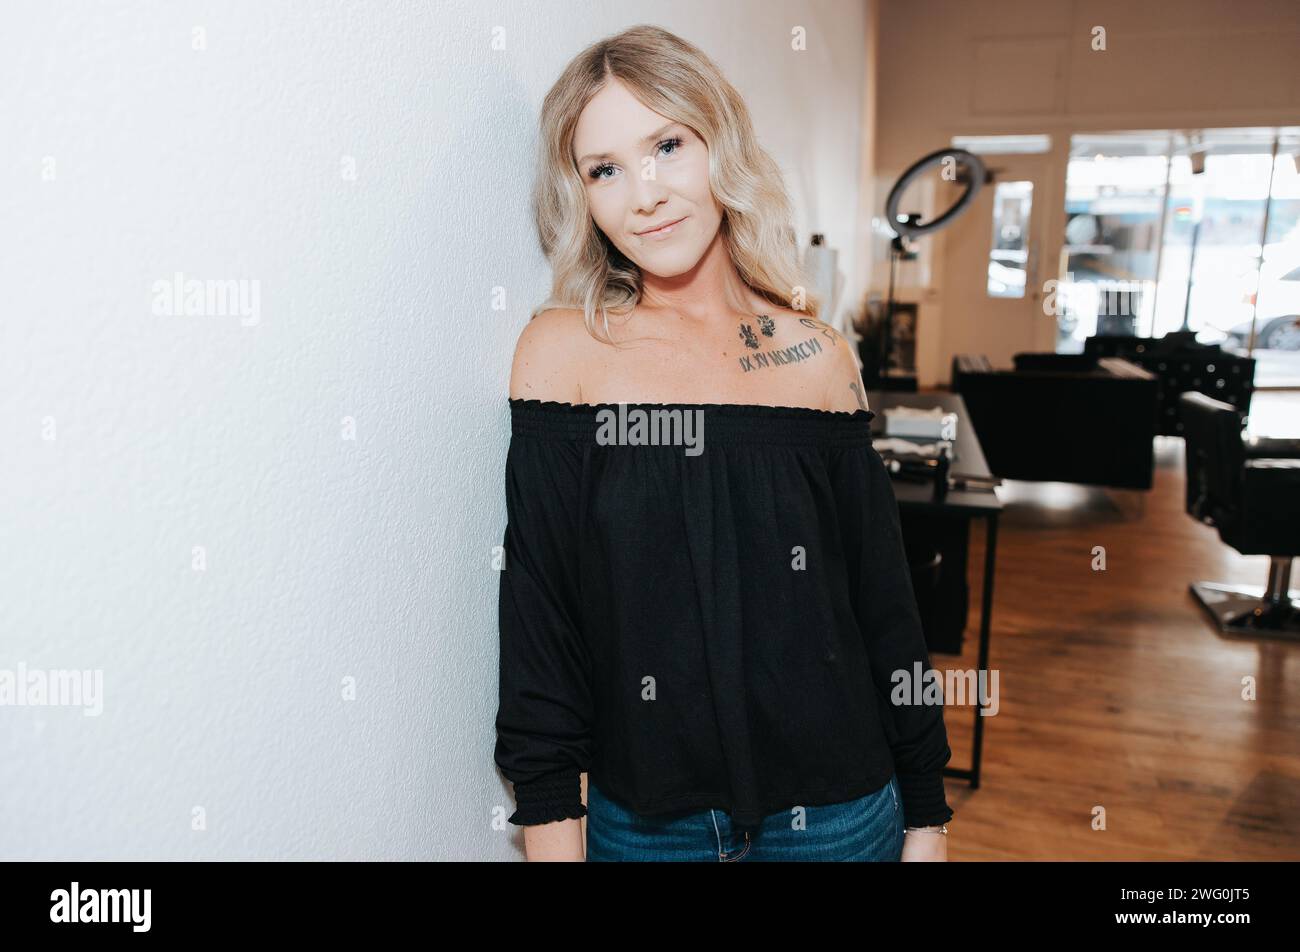 Female permanent makeup artist stands by a wall for headshot pictures Stock Photo